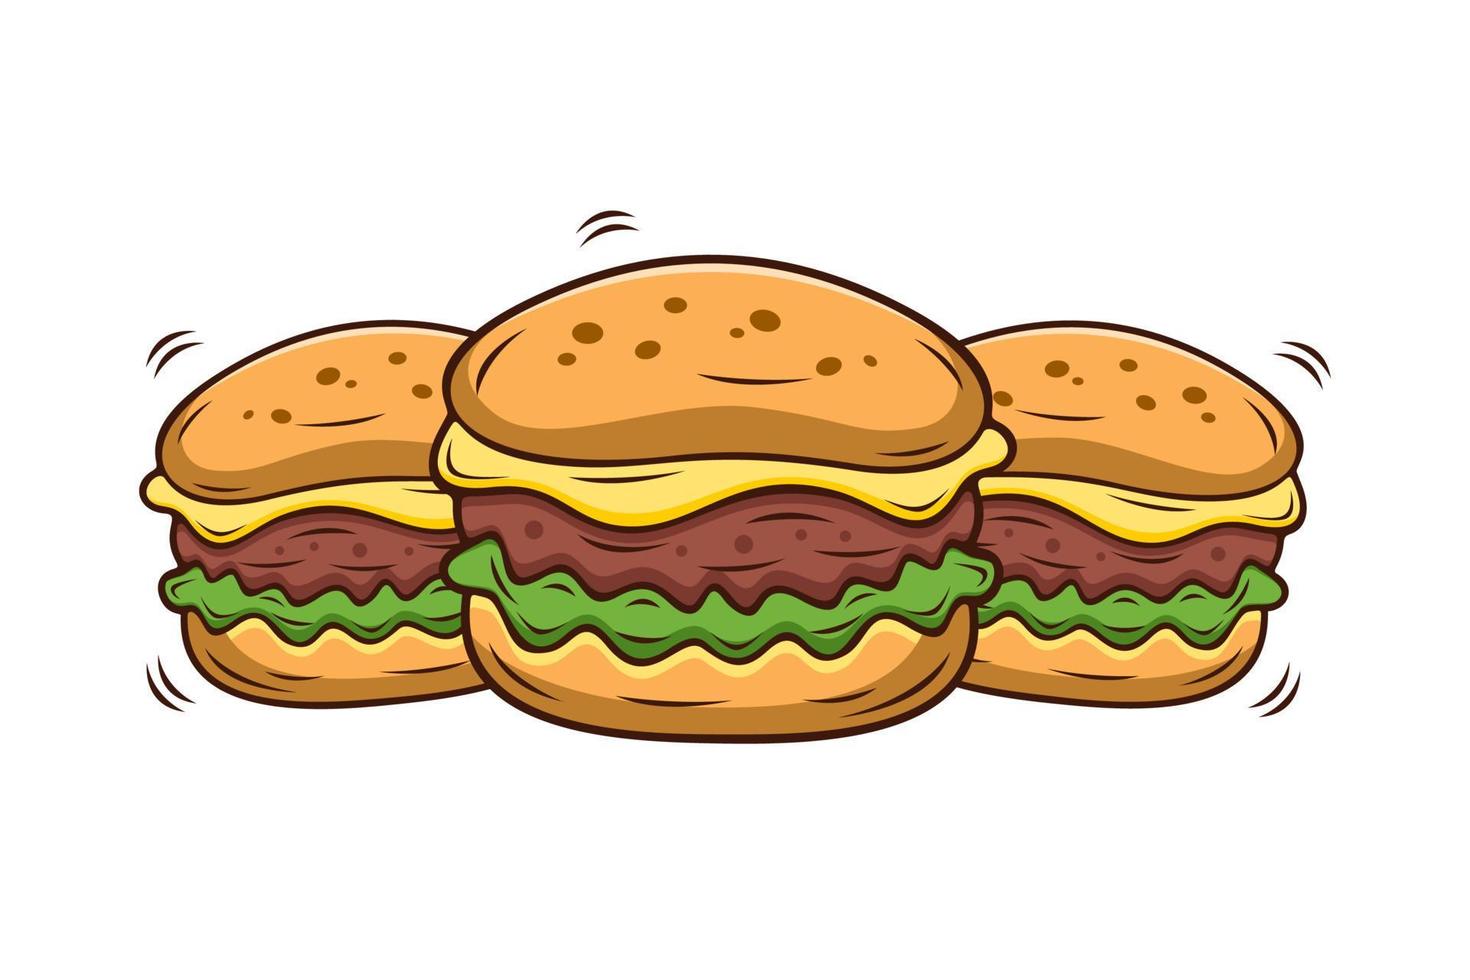 Burger vector illustration with white background